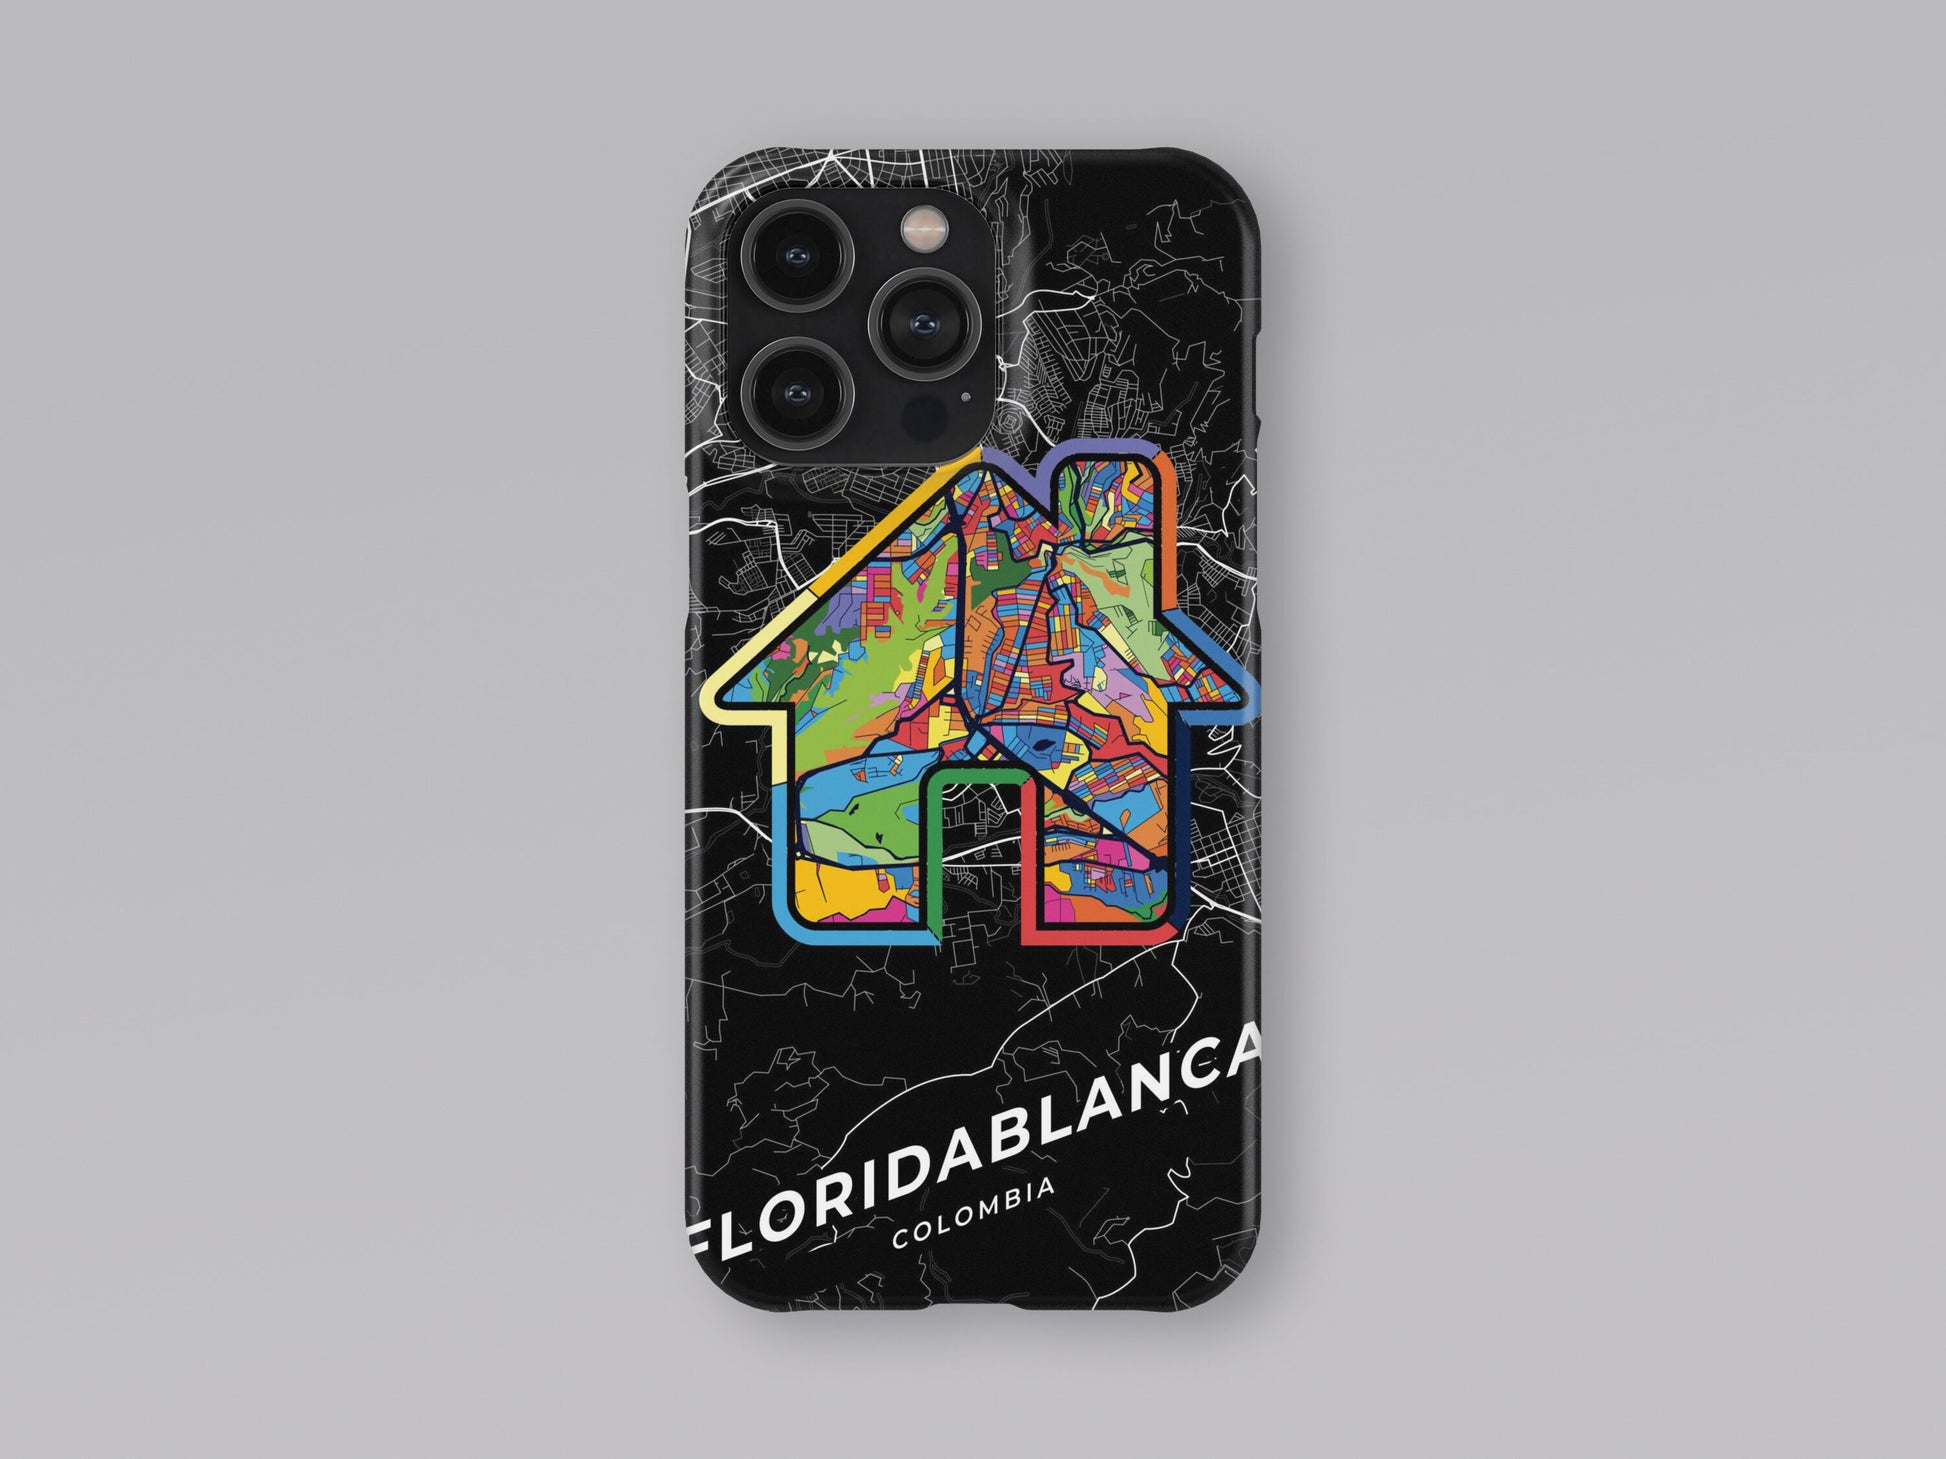 Floridablanca Colombia slim phone case with colorful icon. Birthday, wedding or housewarming gift. Couple match cases. 3